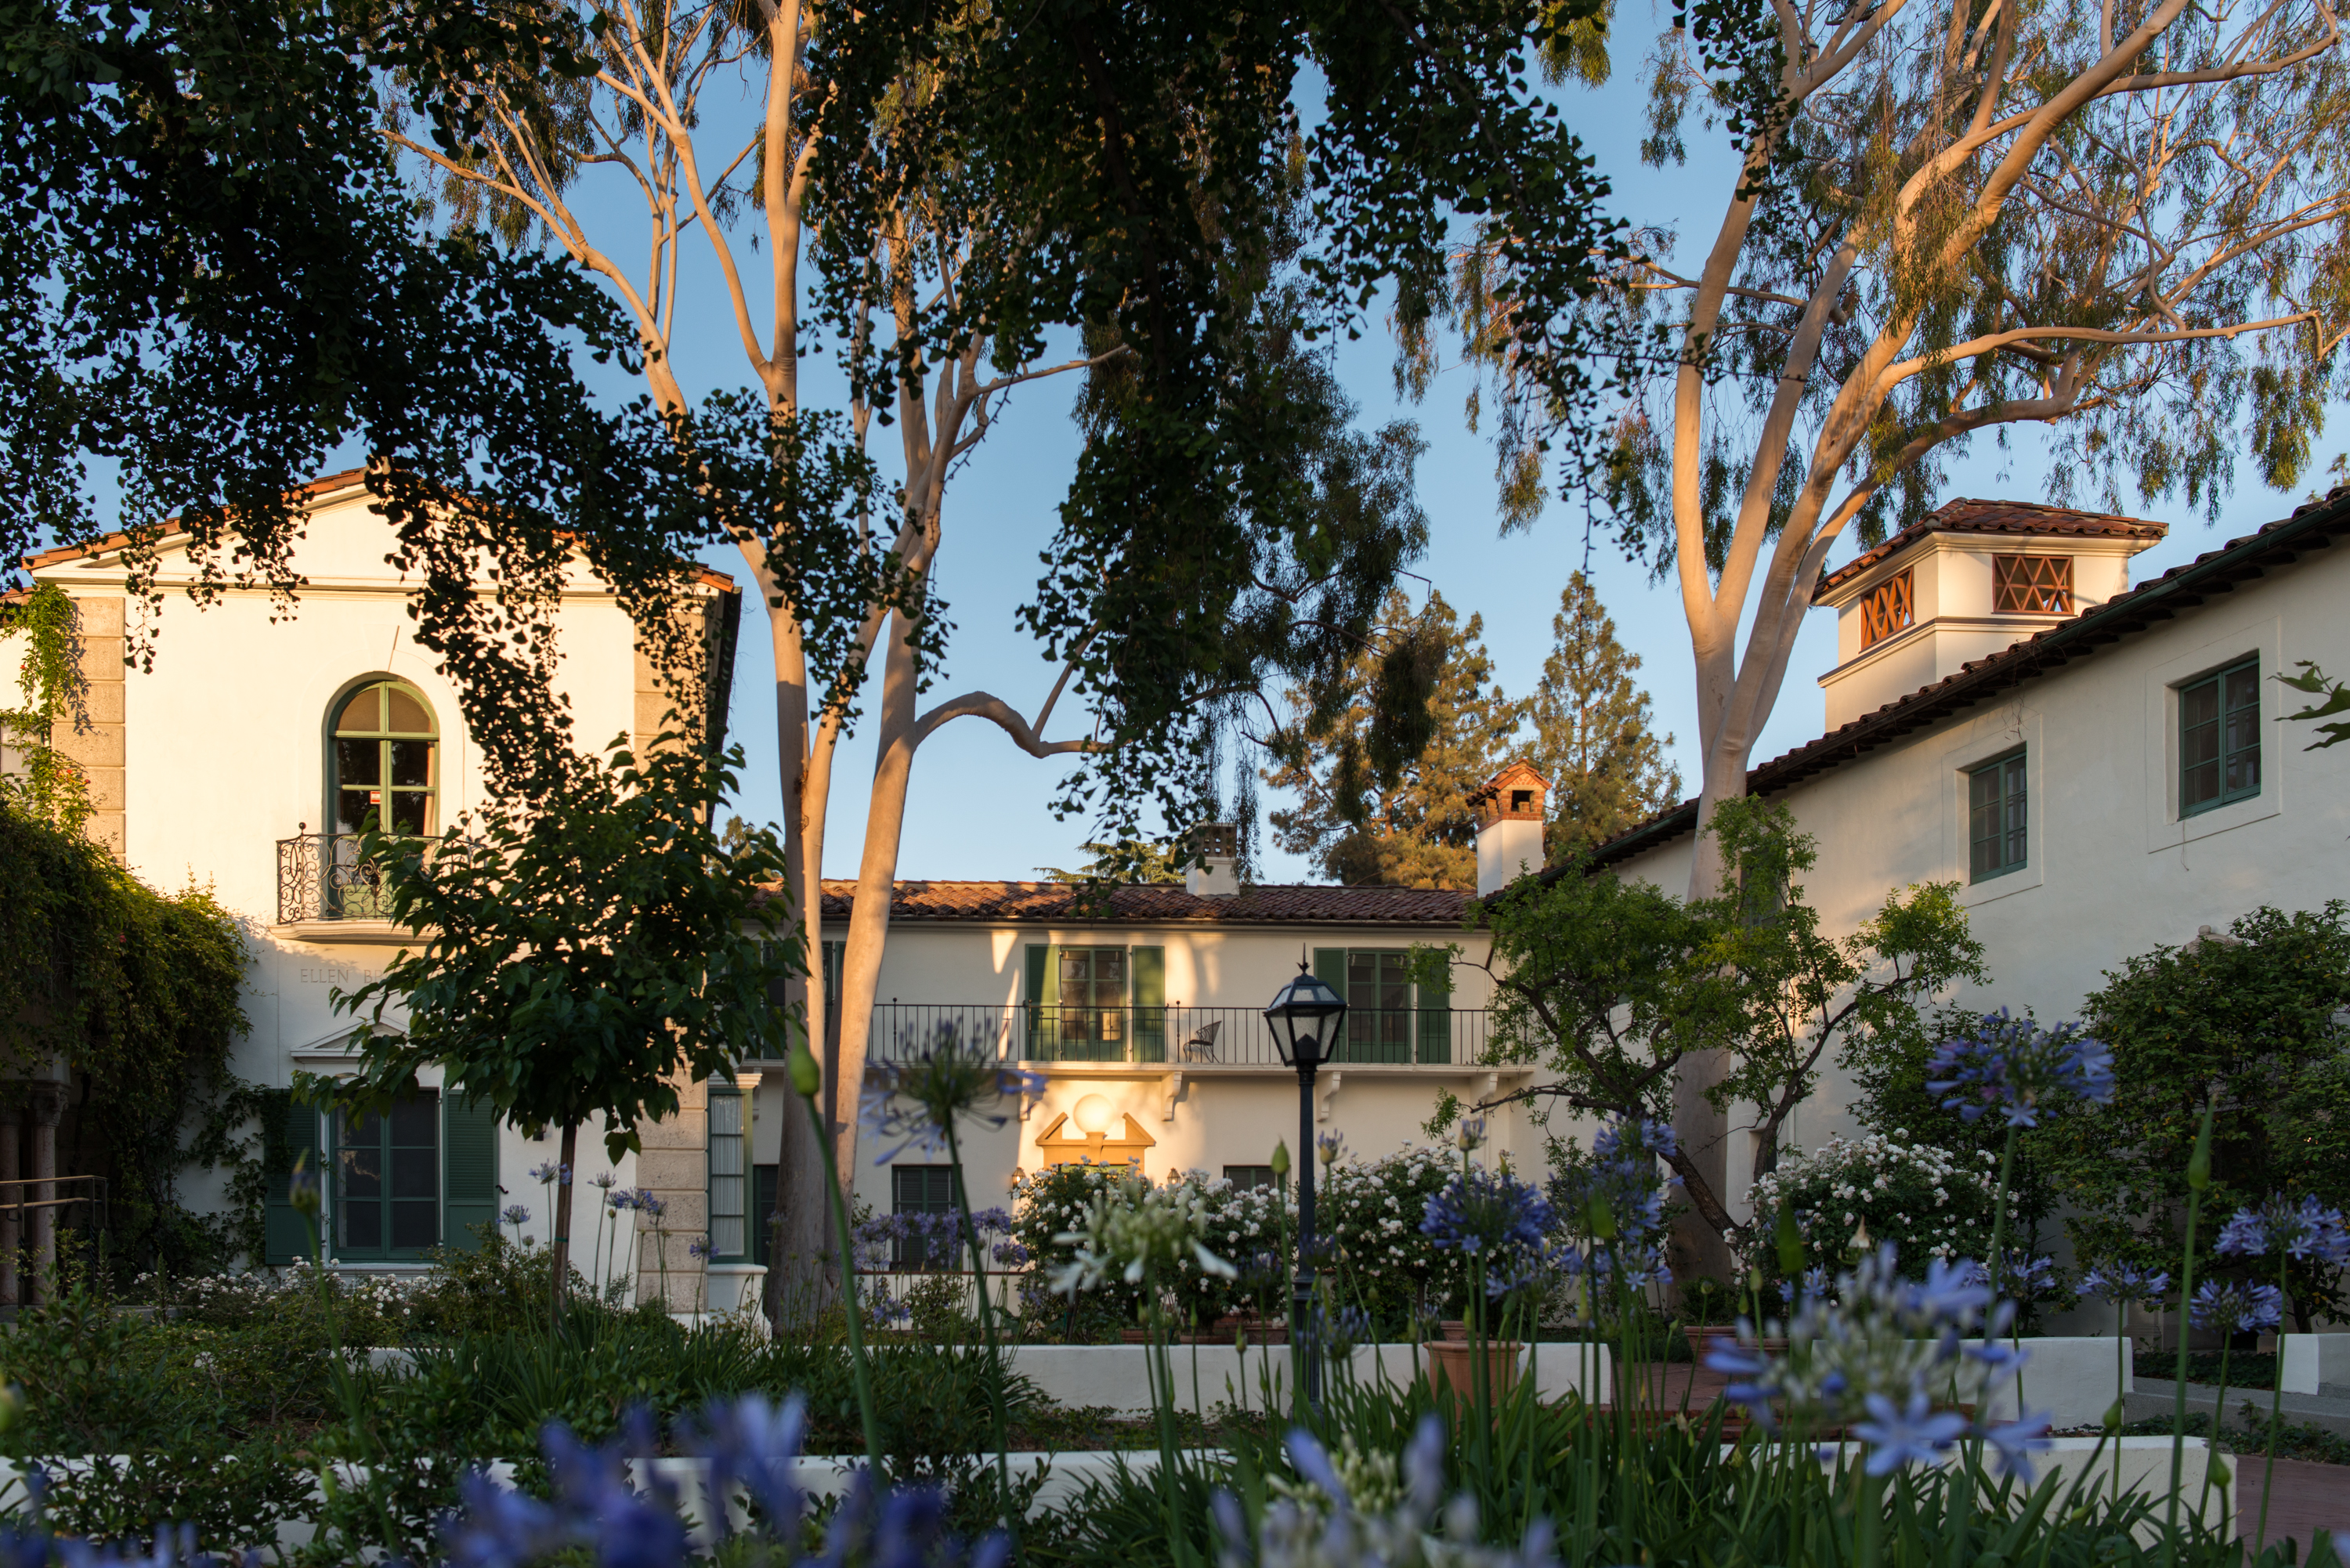 The outside of residence halls at Scripps College.